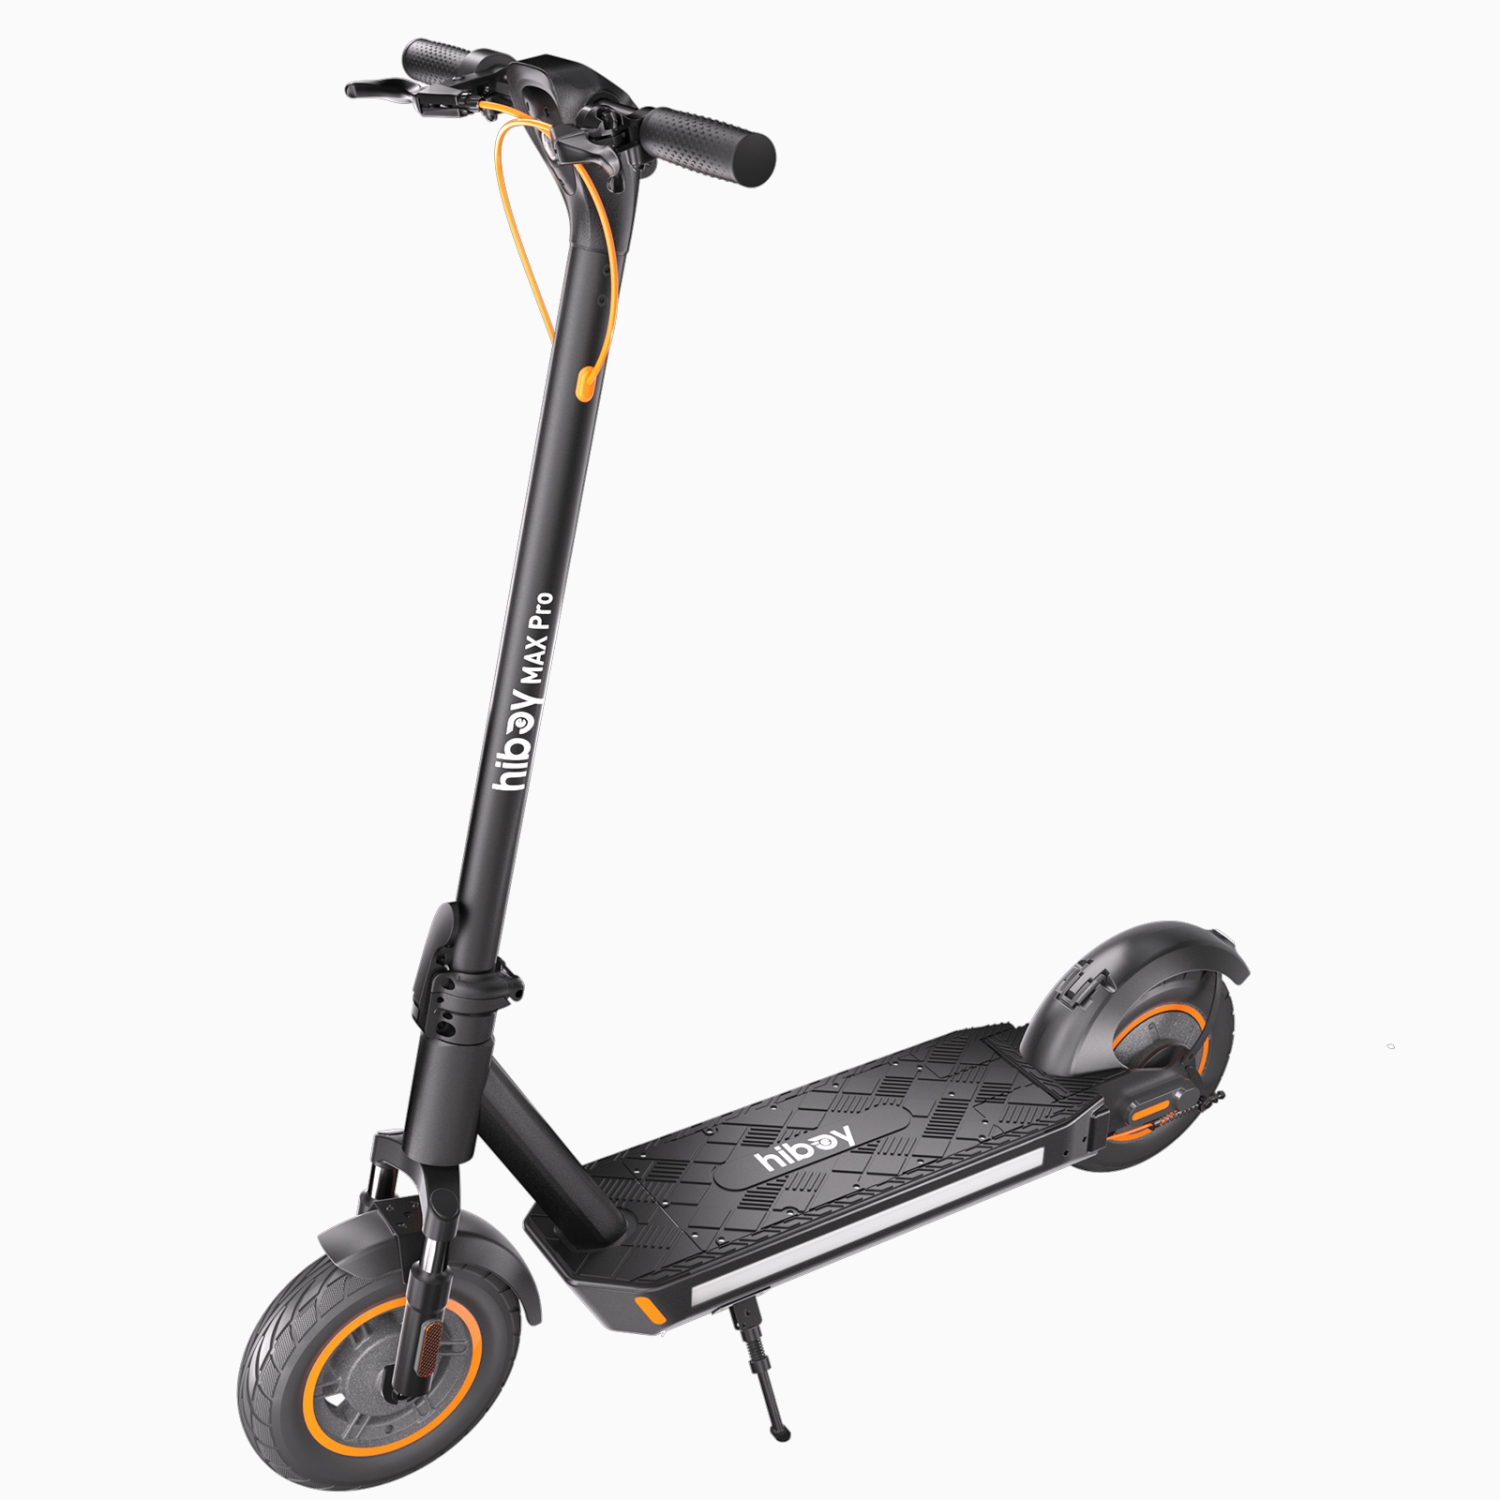 Hiboy MAX Pro Electric Scooter, 74km Range / 35km/h / 650W Motor / 11'' Pneumatic Tires / Split Hub Design / Dual Suspension / 120kg MAX Load, Commuting Kick Scooter for Adults